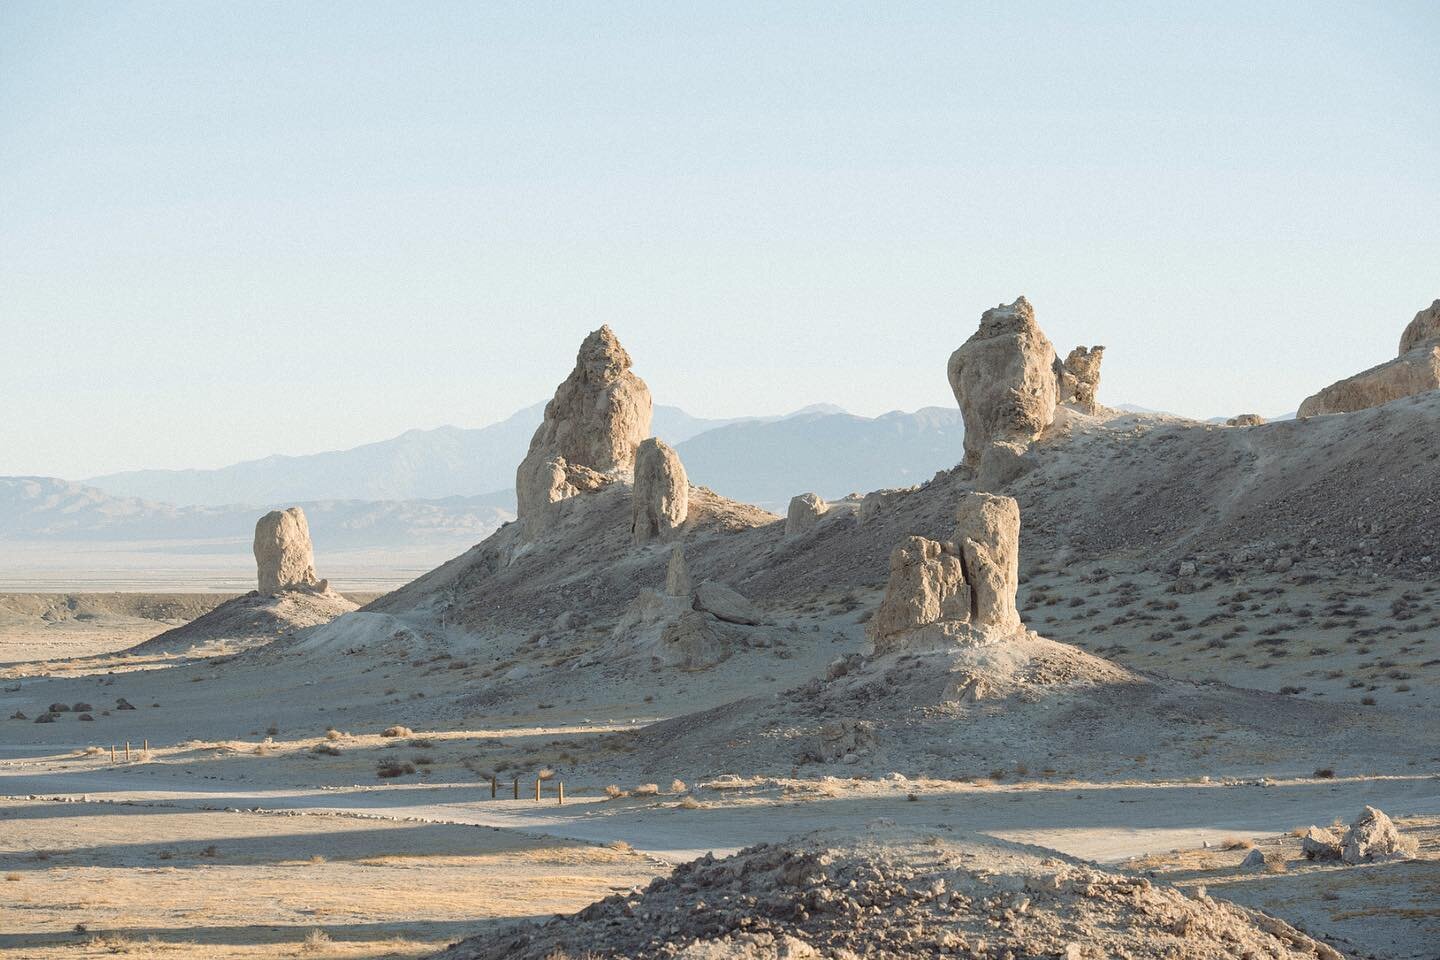 Wild rock formations in the Californian desert. Nature is pretty incredible. // from my California archives